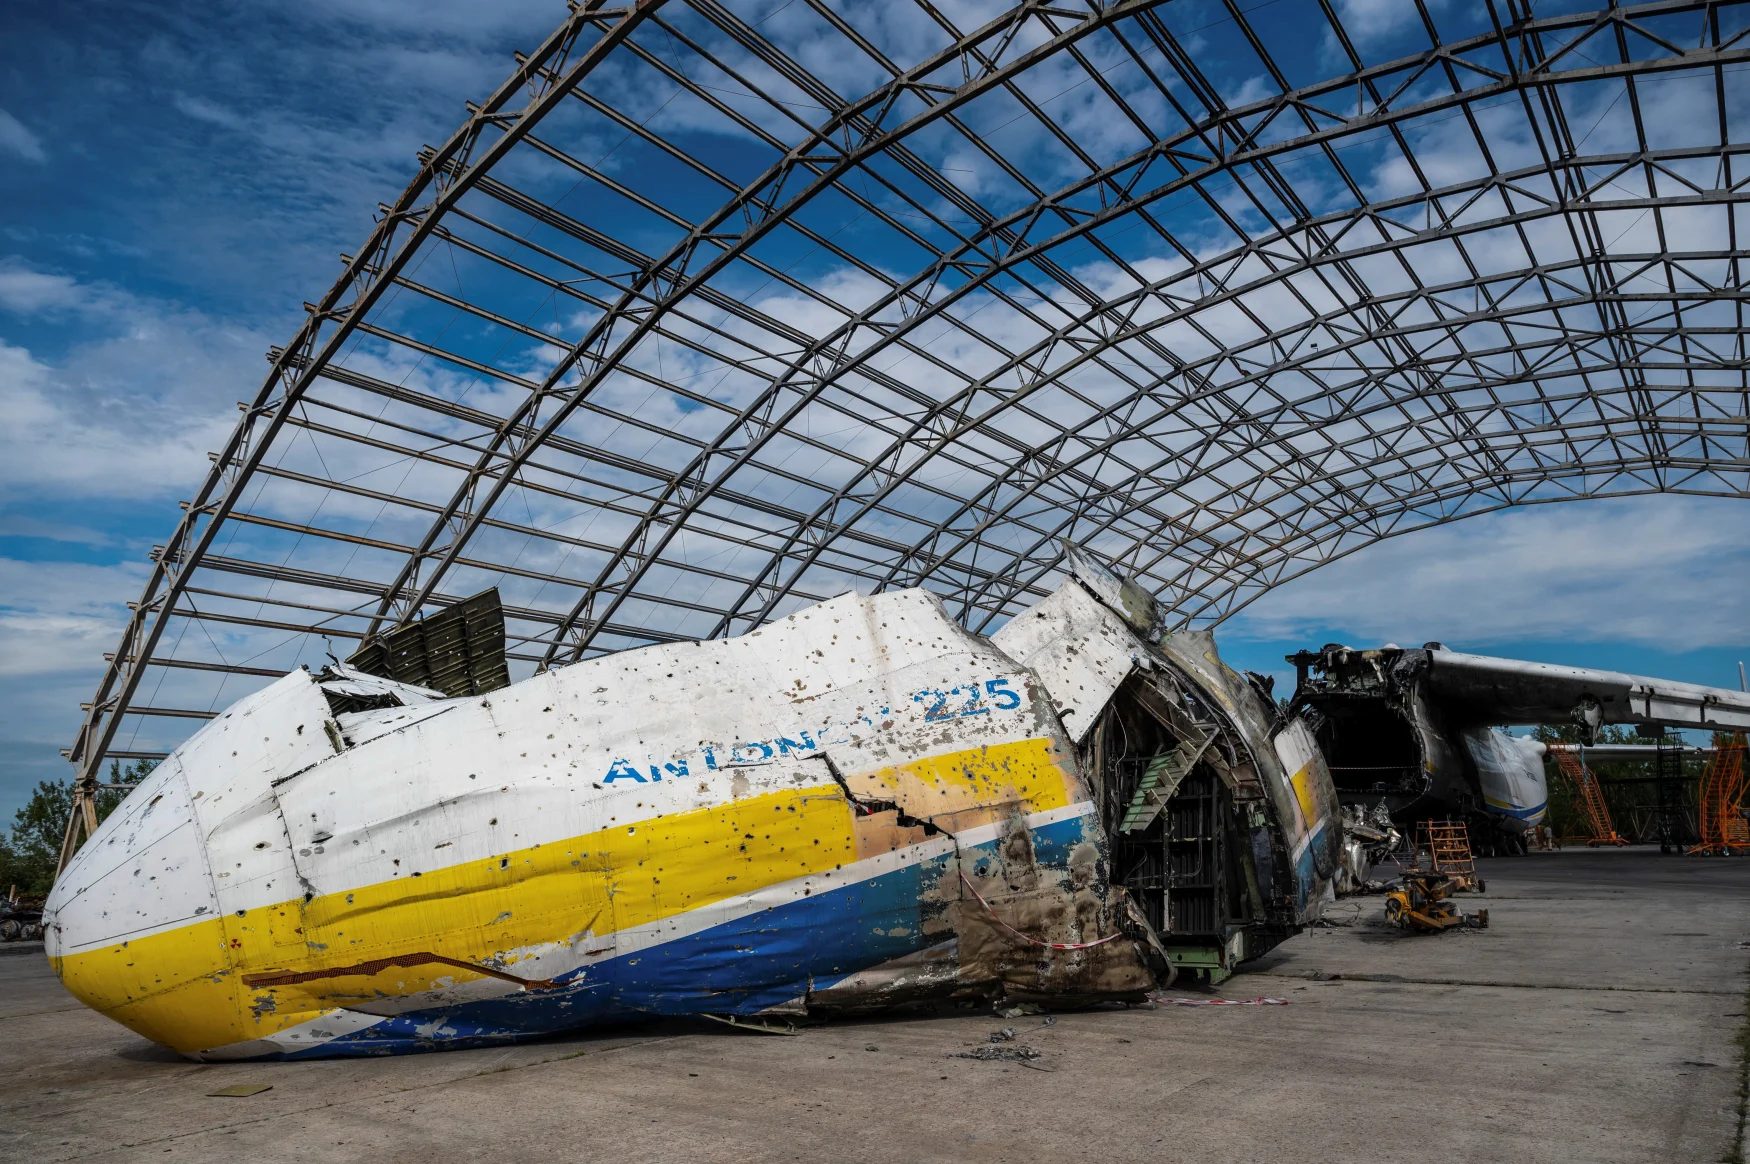 An Antonov An-225 Mriya cargo plane, the world's biggest aircraft, destroyed by Russian troops amid Russia's attack on Ukraine continues, is seen at an airfield in the settlement of Hostomel, in Kyiv region, Ukraine August 10, 2022. REUTERS/Viacheslav Ratynskyi